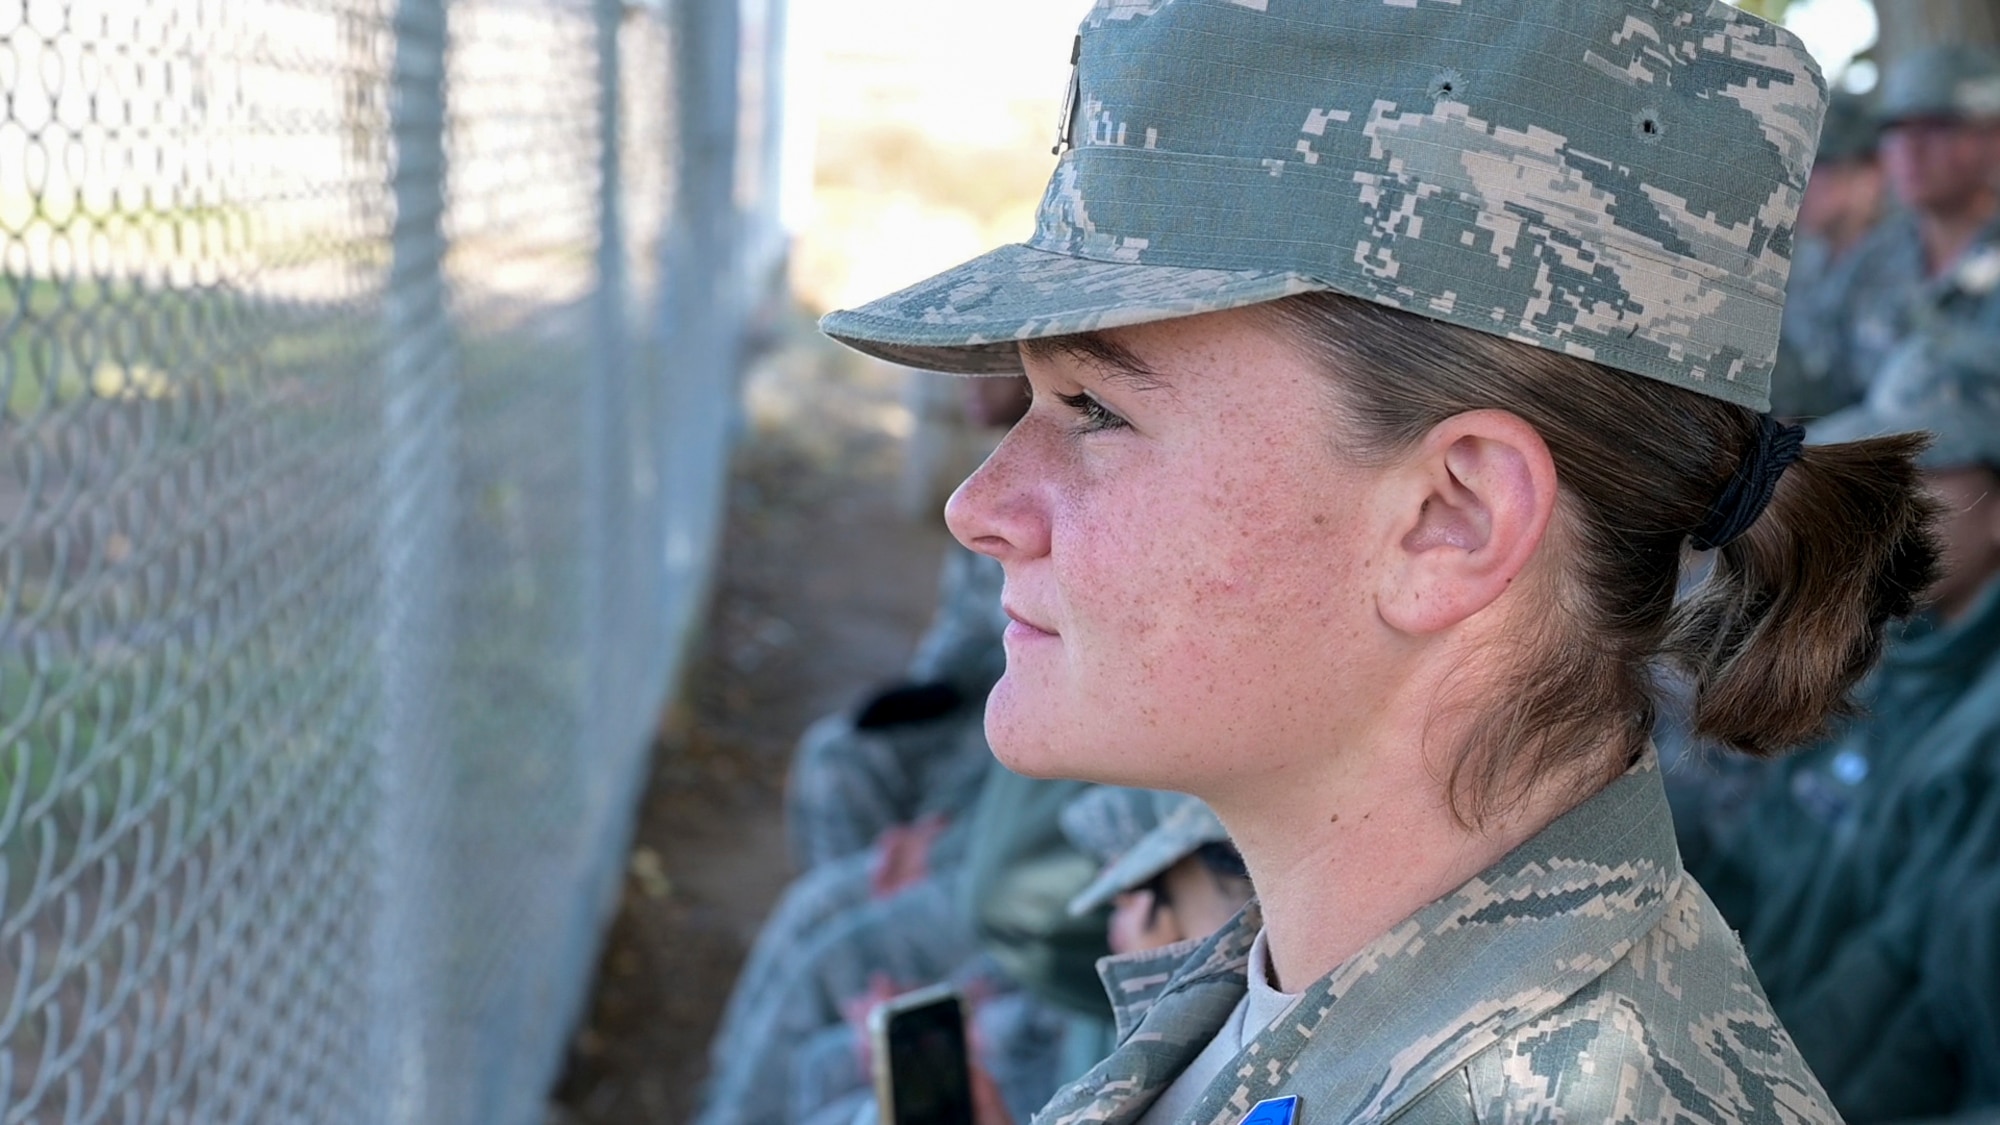 Cadet Eden Hewes was one of about 100 JROTC cadets from Desert High School that came to learn the way of the Defender from the 412th Security Forces Squadron at Edwards Air Force Base, California. These cadets may then graduate high school and move on to the grueling task of basic training.